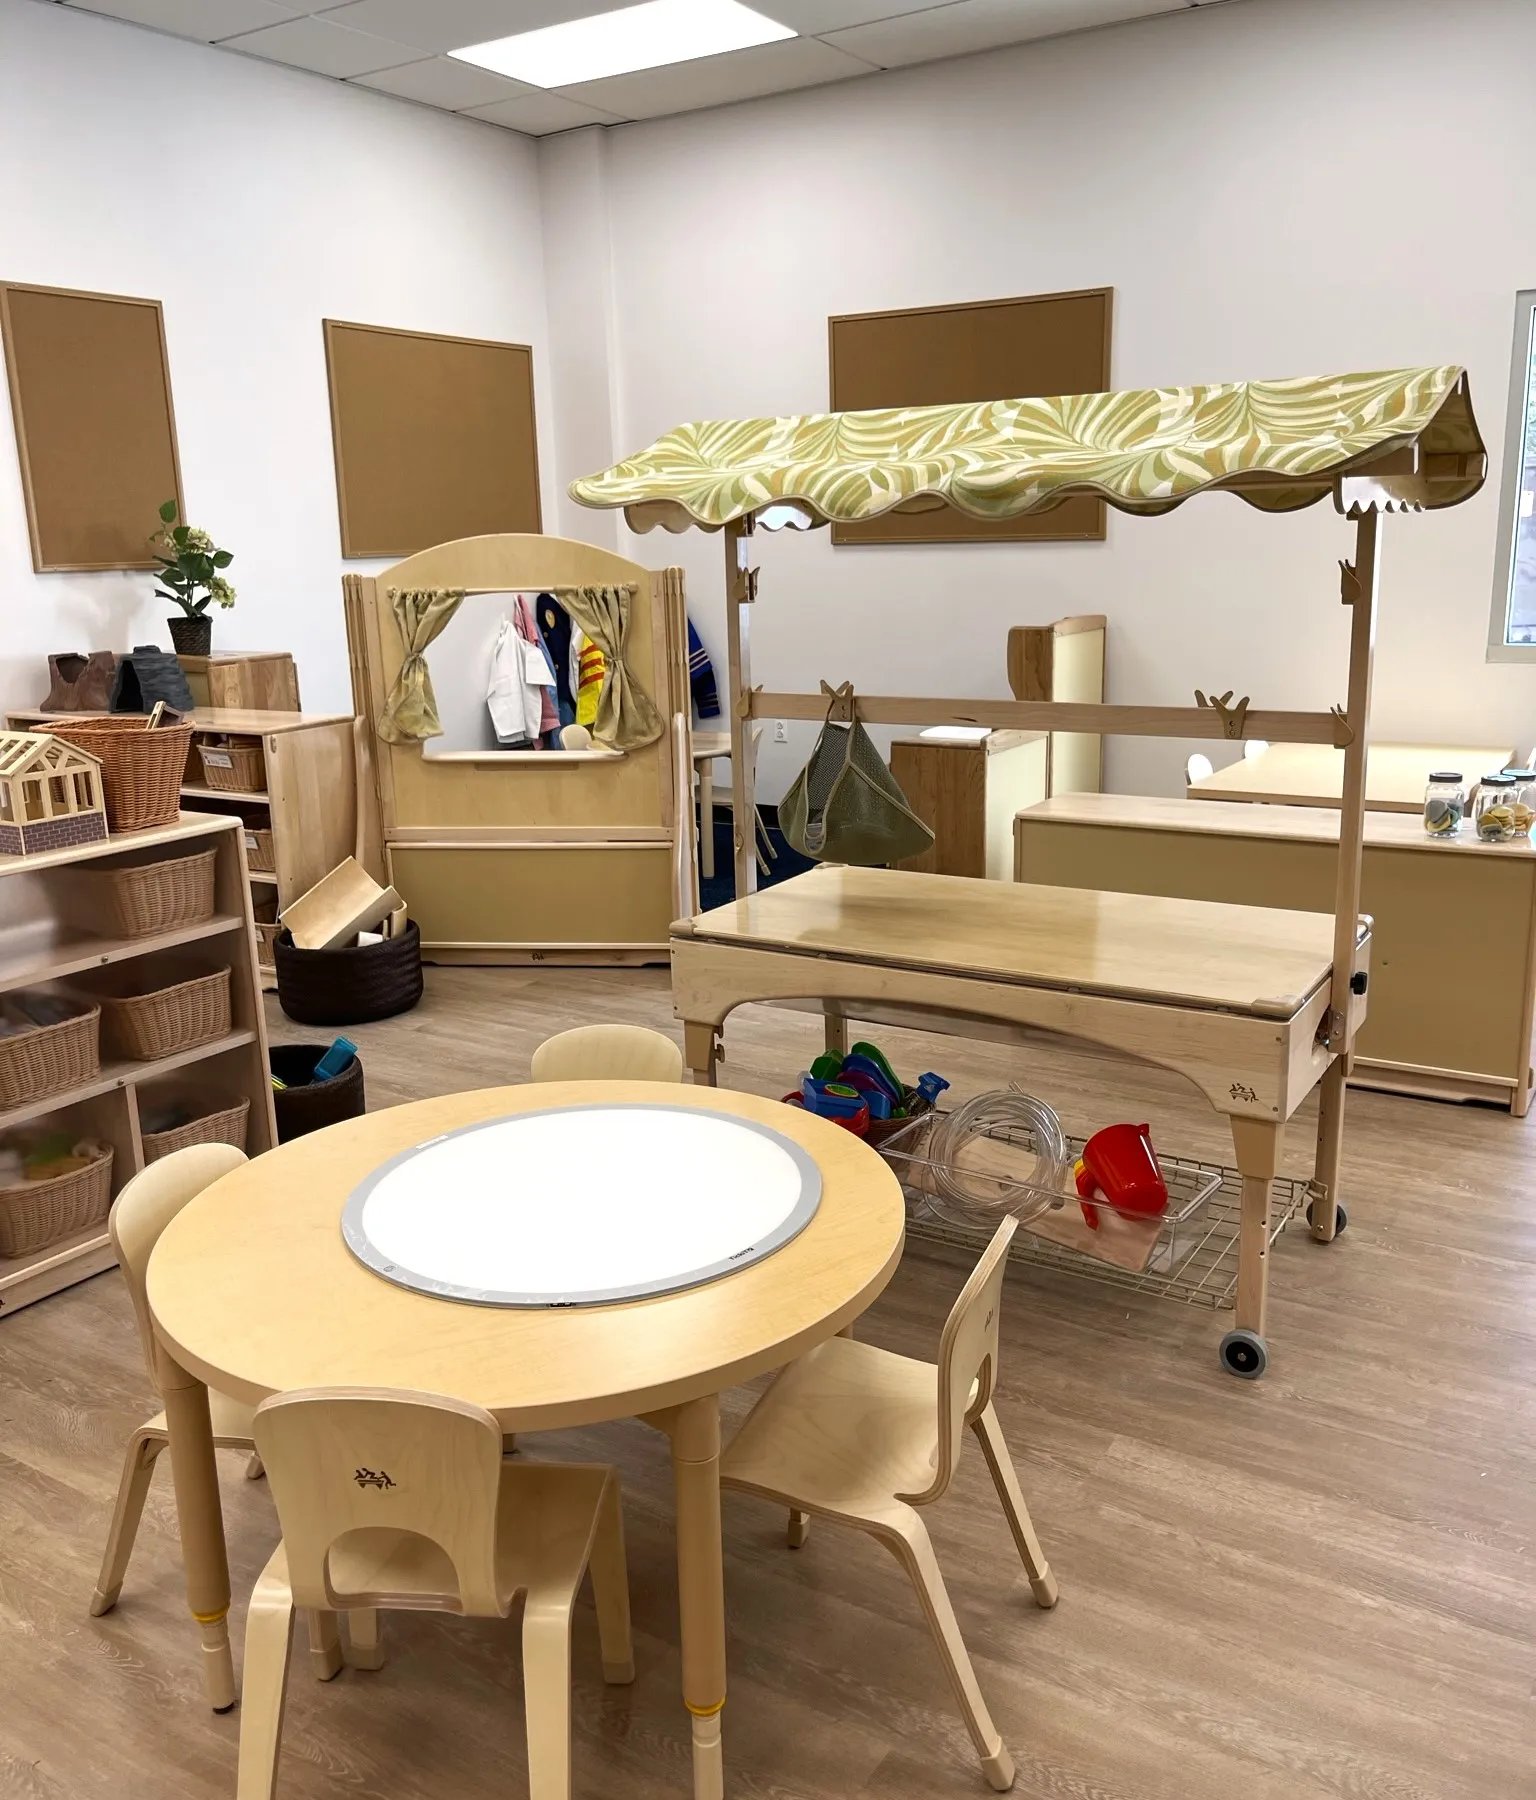 Modern facilities showcased at BrightPath Medway Daycare Center.